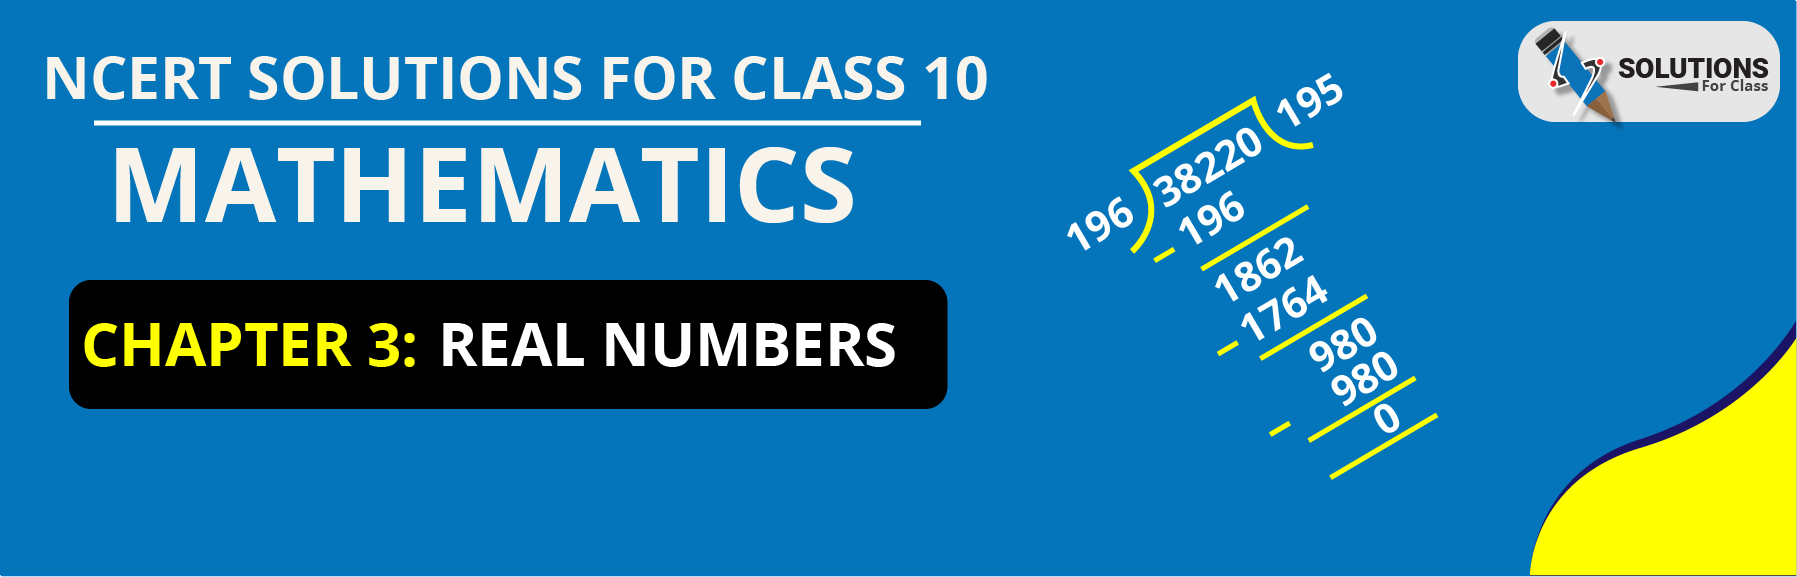 NCERT Solutions For Class 10, Maths, Chapter 1, Real Numbers